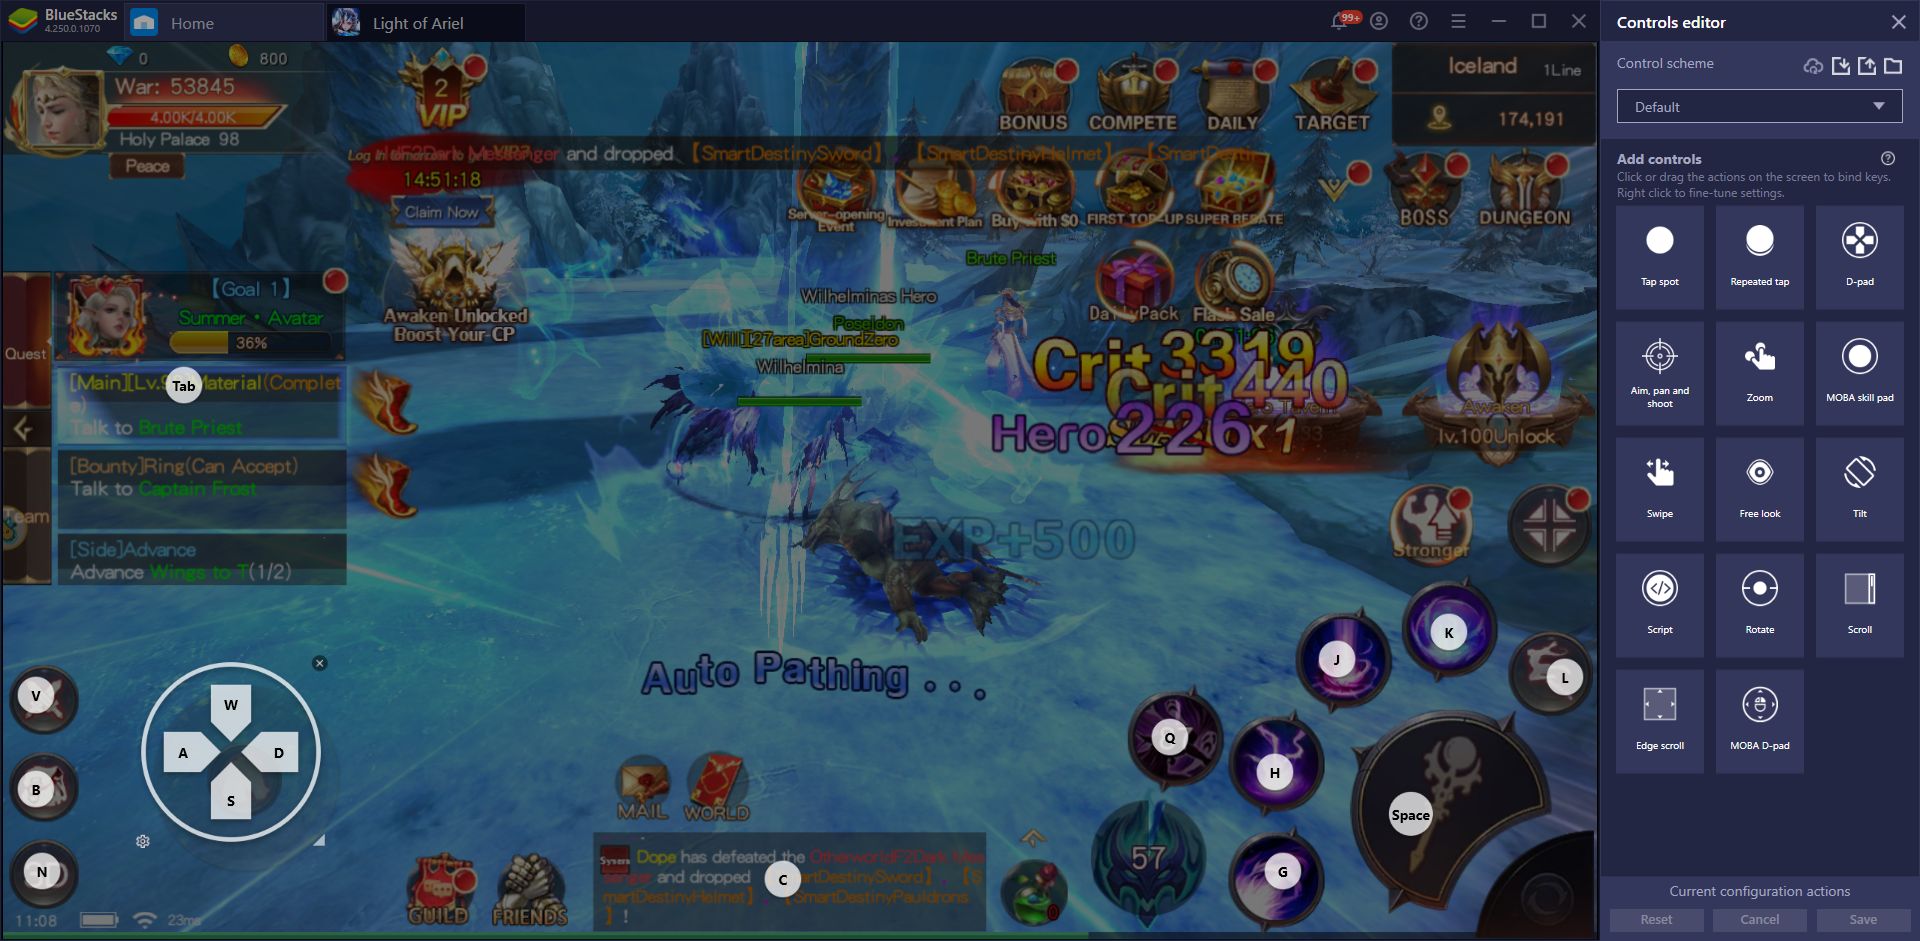 Light of Ariel on PC - How to Use BlueStacks Tools to Win in this Mobile MMORPG